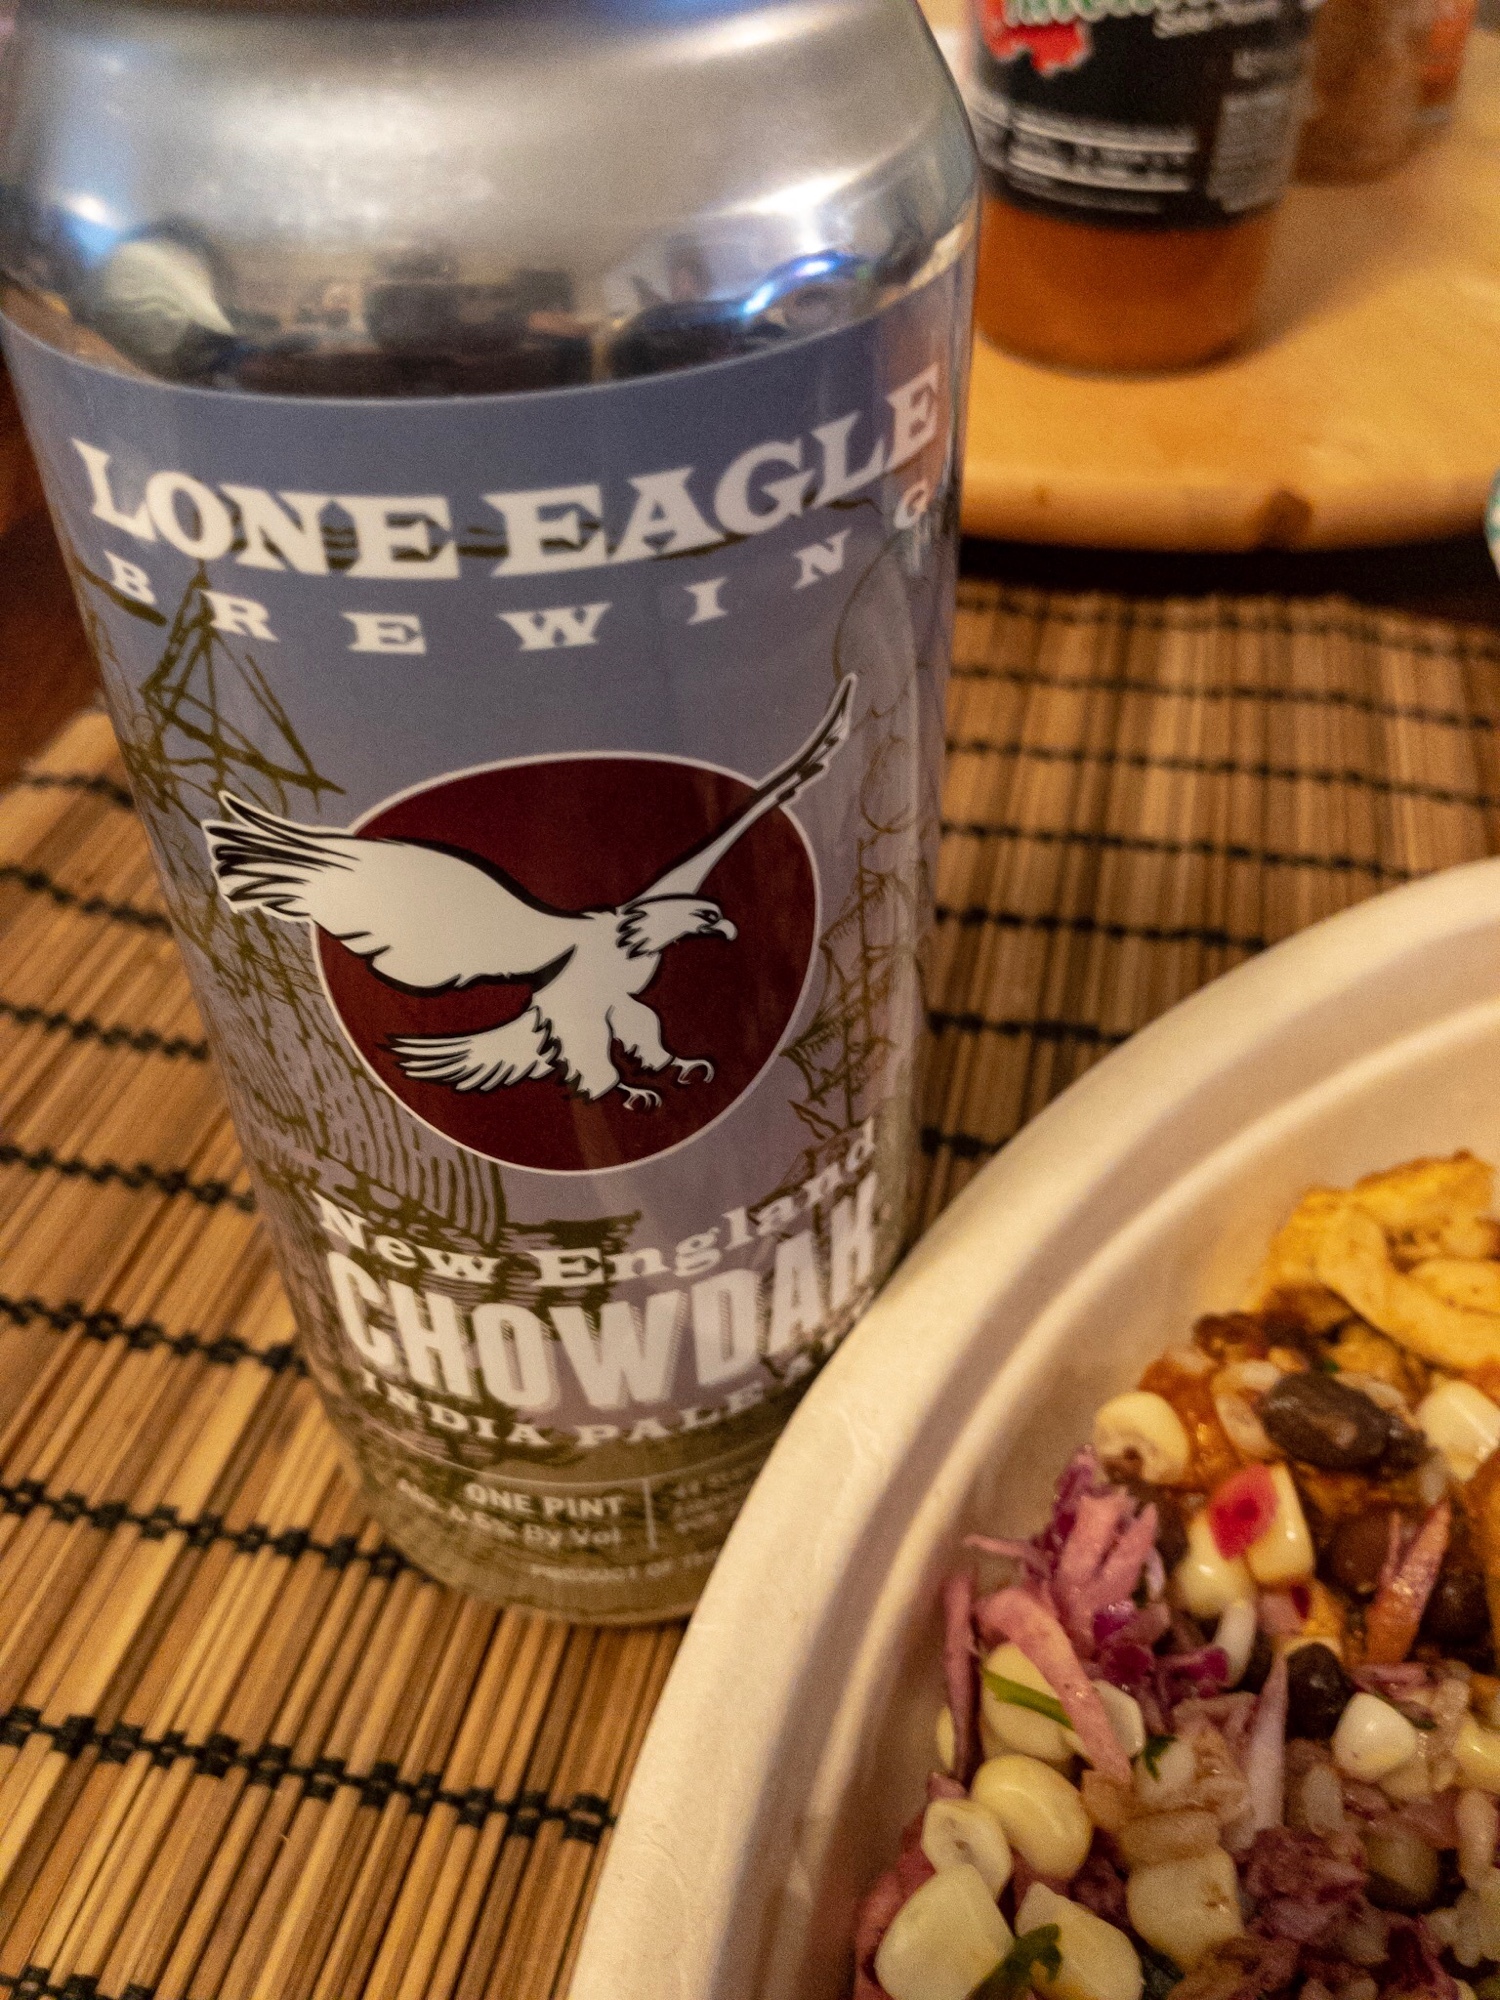 Lone Eagle Brewing's New England Chowdah